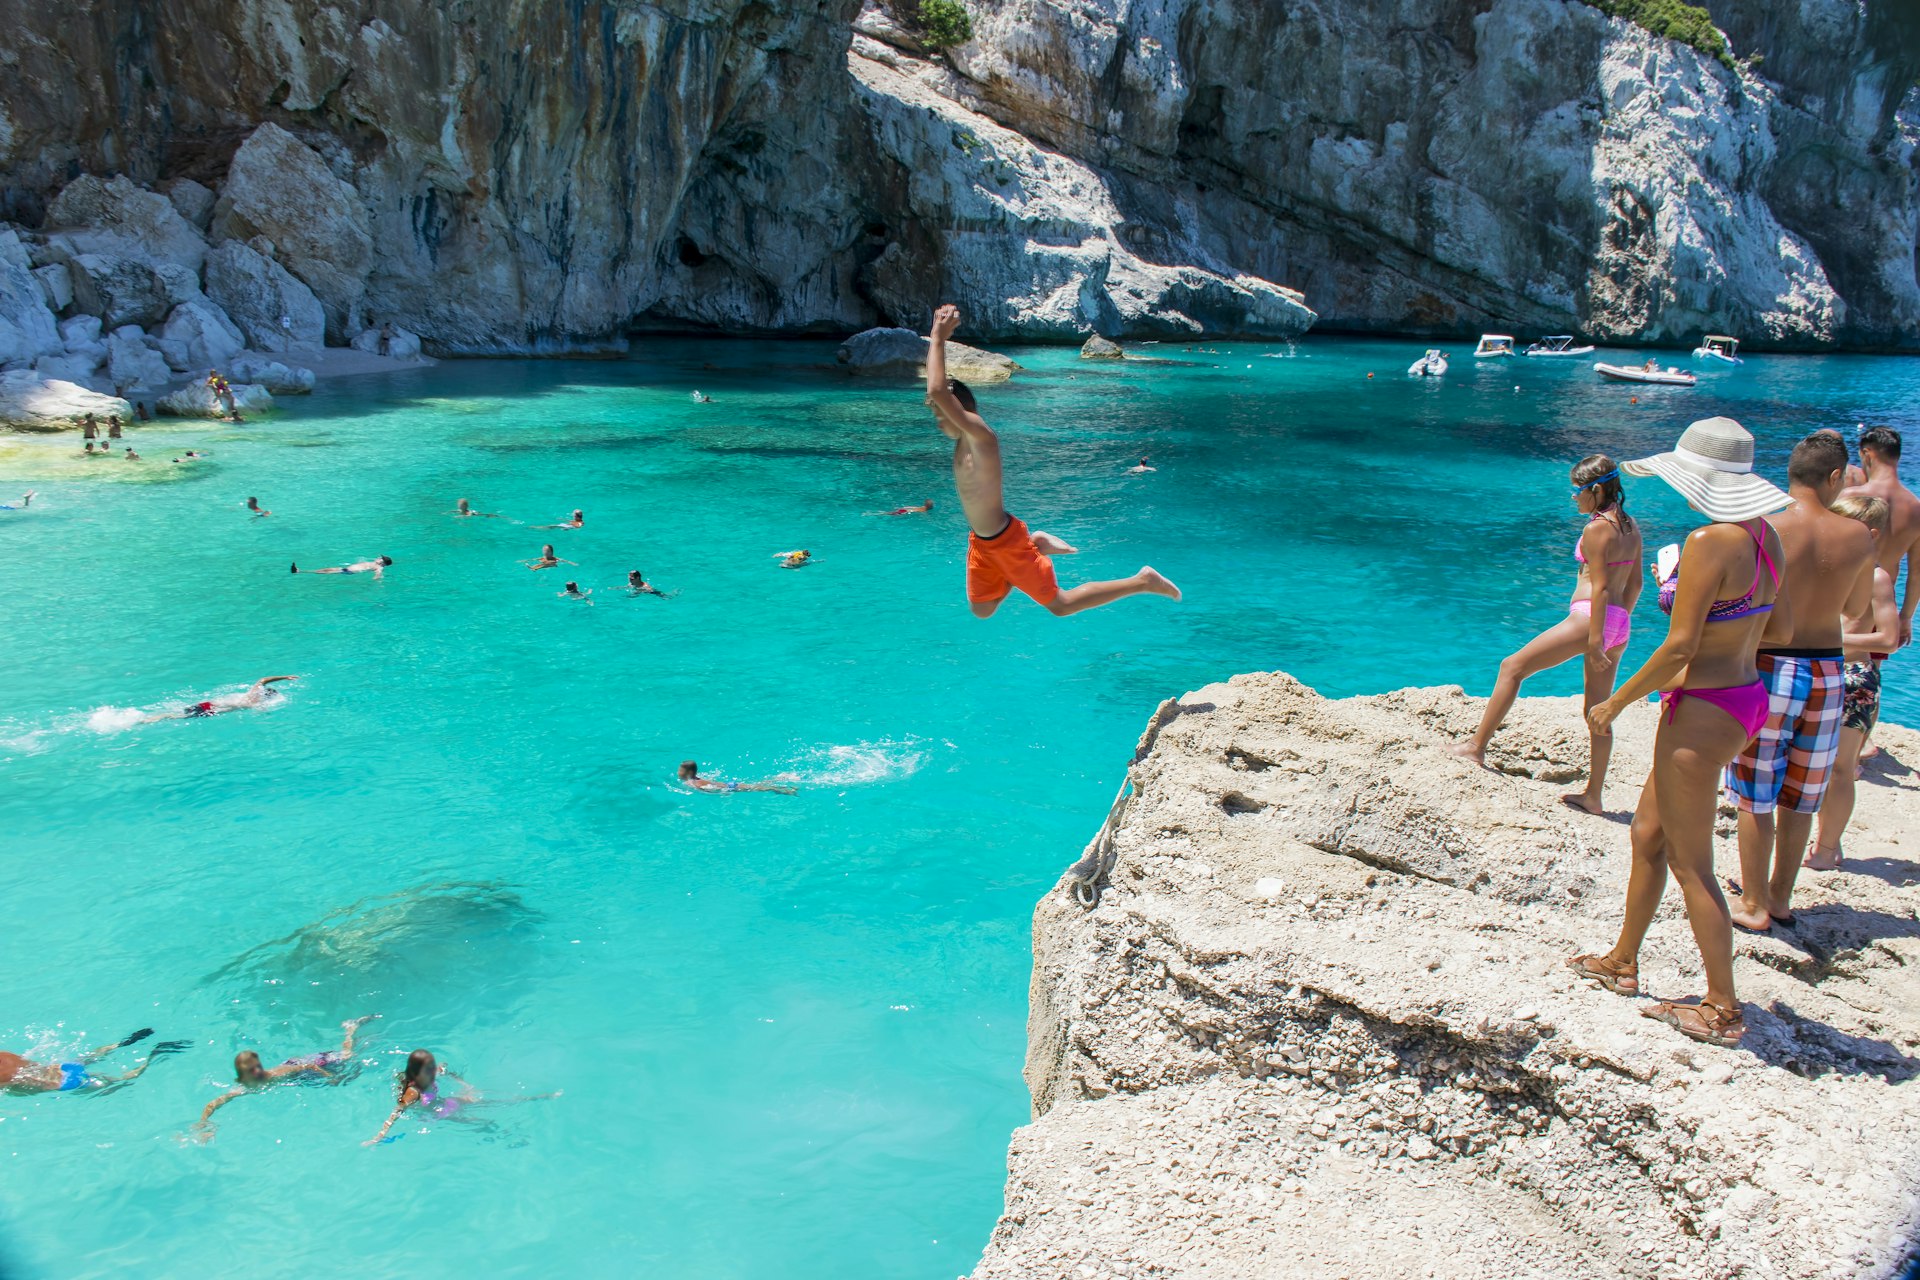 People jump off rocks into the turquoise waters of the sea below